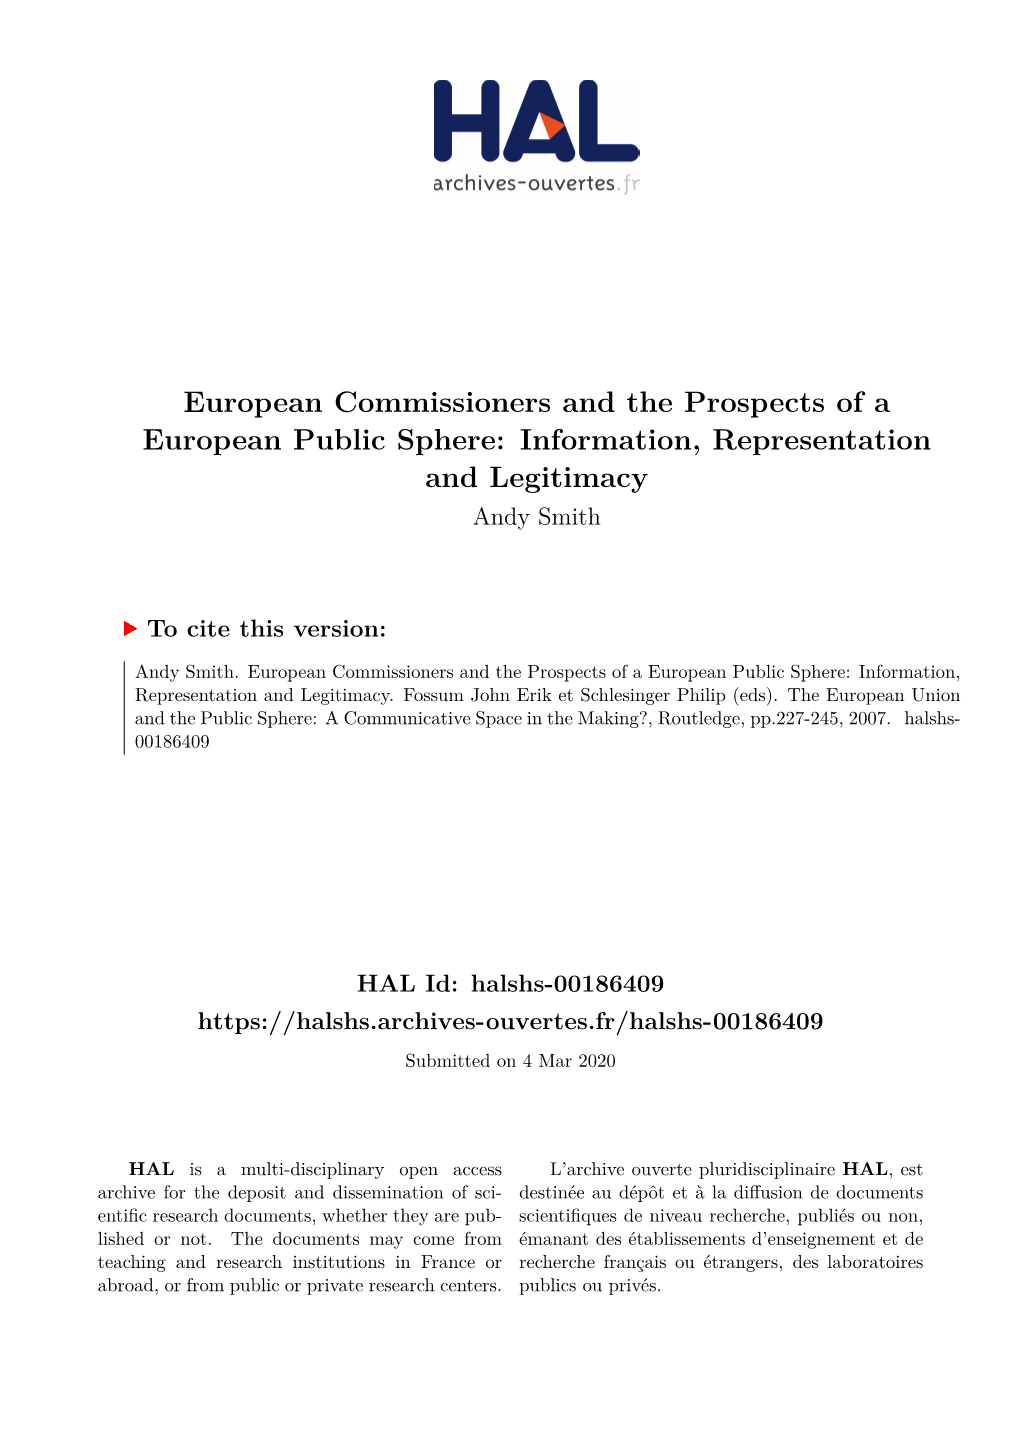 European Commissioners and the Prospects of a European Public Sphere: Information, Representation and Legitimacy Andy Smith